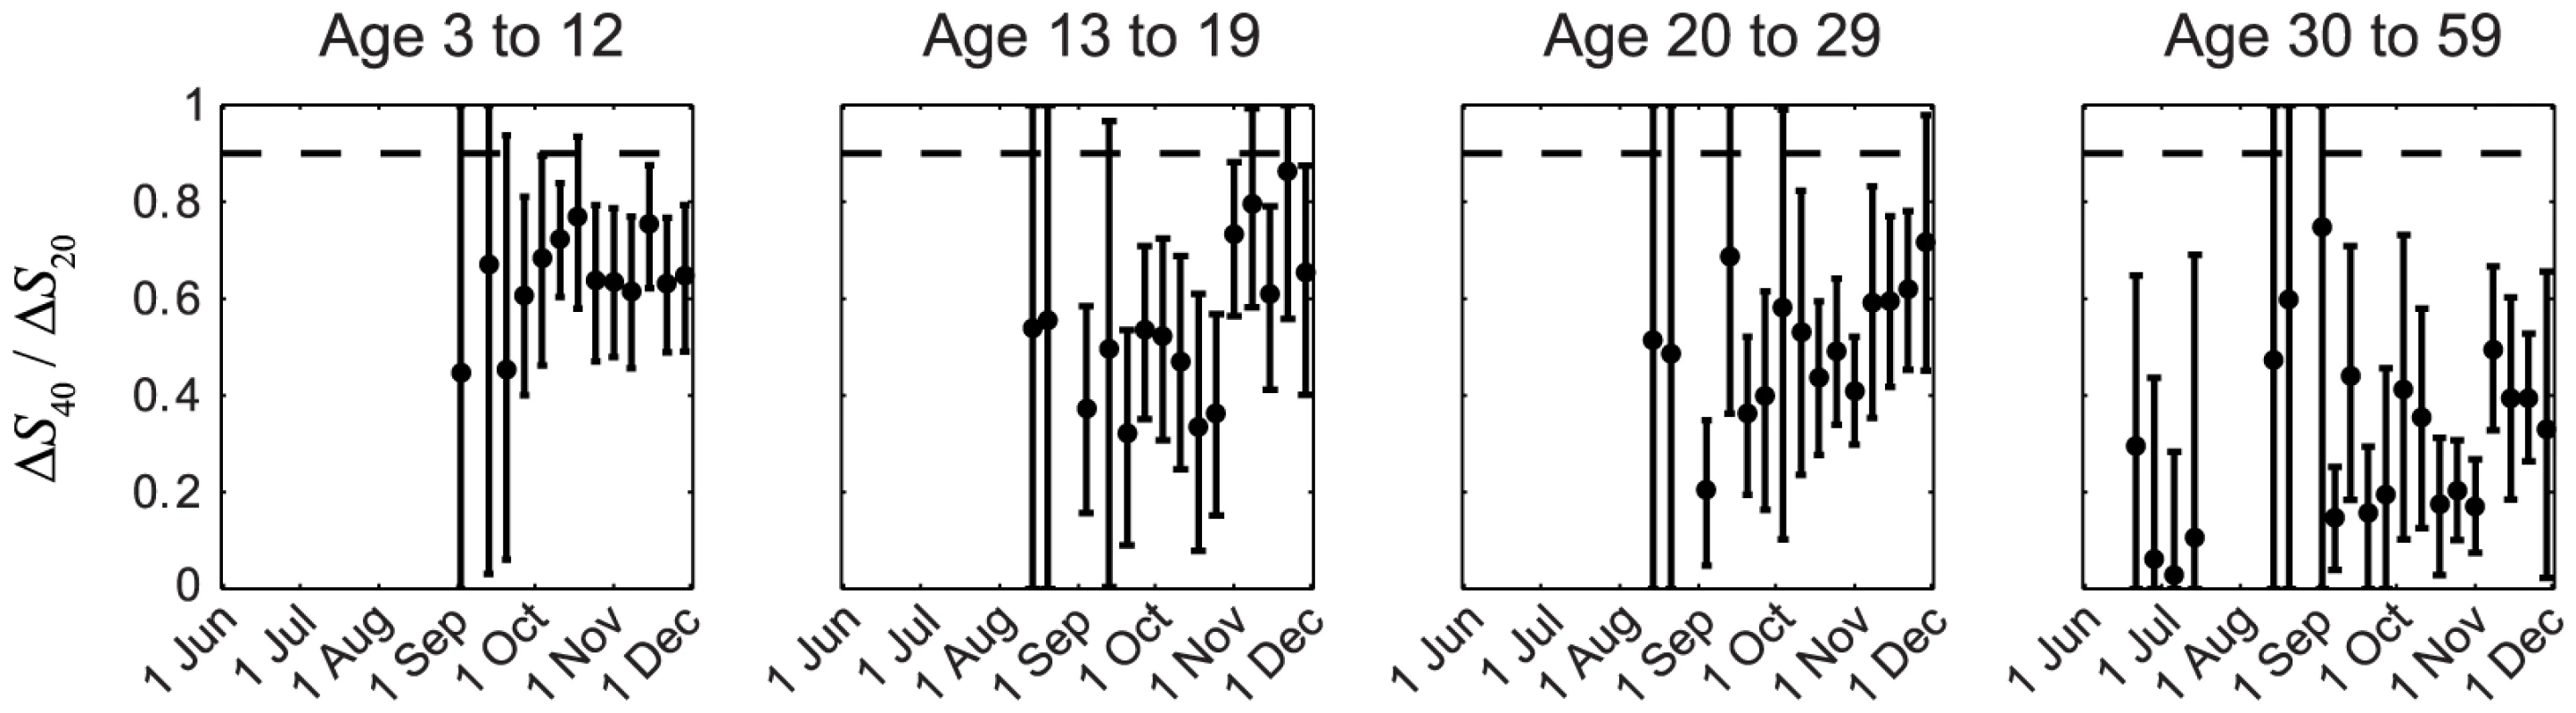 Age-specific Δ<i>S</i><sub>40</sub>/Δ<i>S</i><sub>20</sub> during the first wave of pdmH1N1 in Hong Kong.